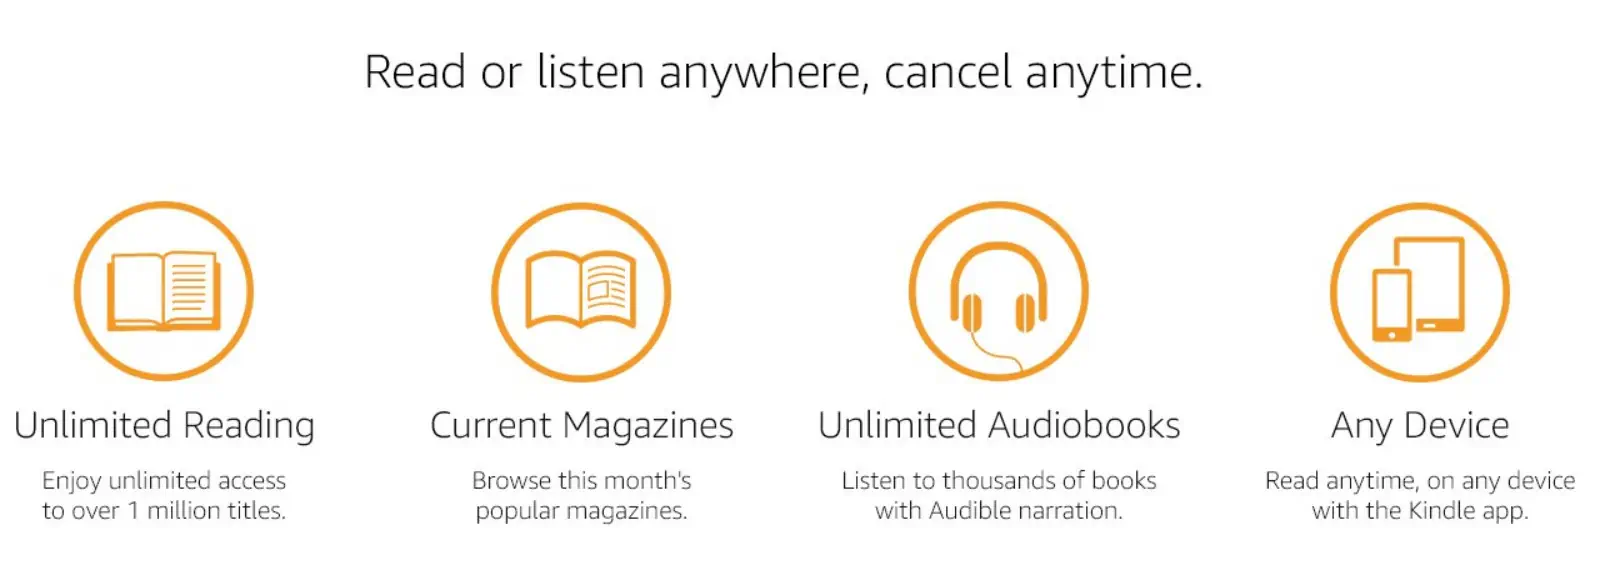 Kindle Unlimited deal with unlimited magazines and audiobooks.